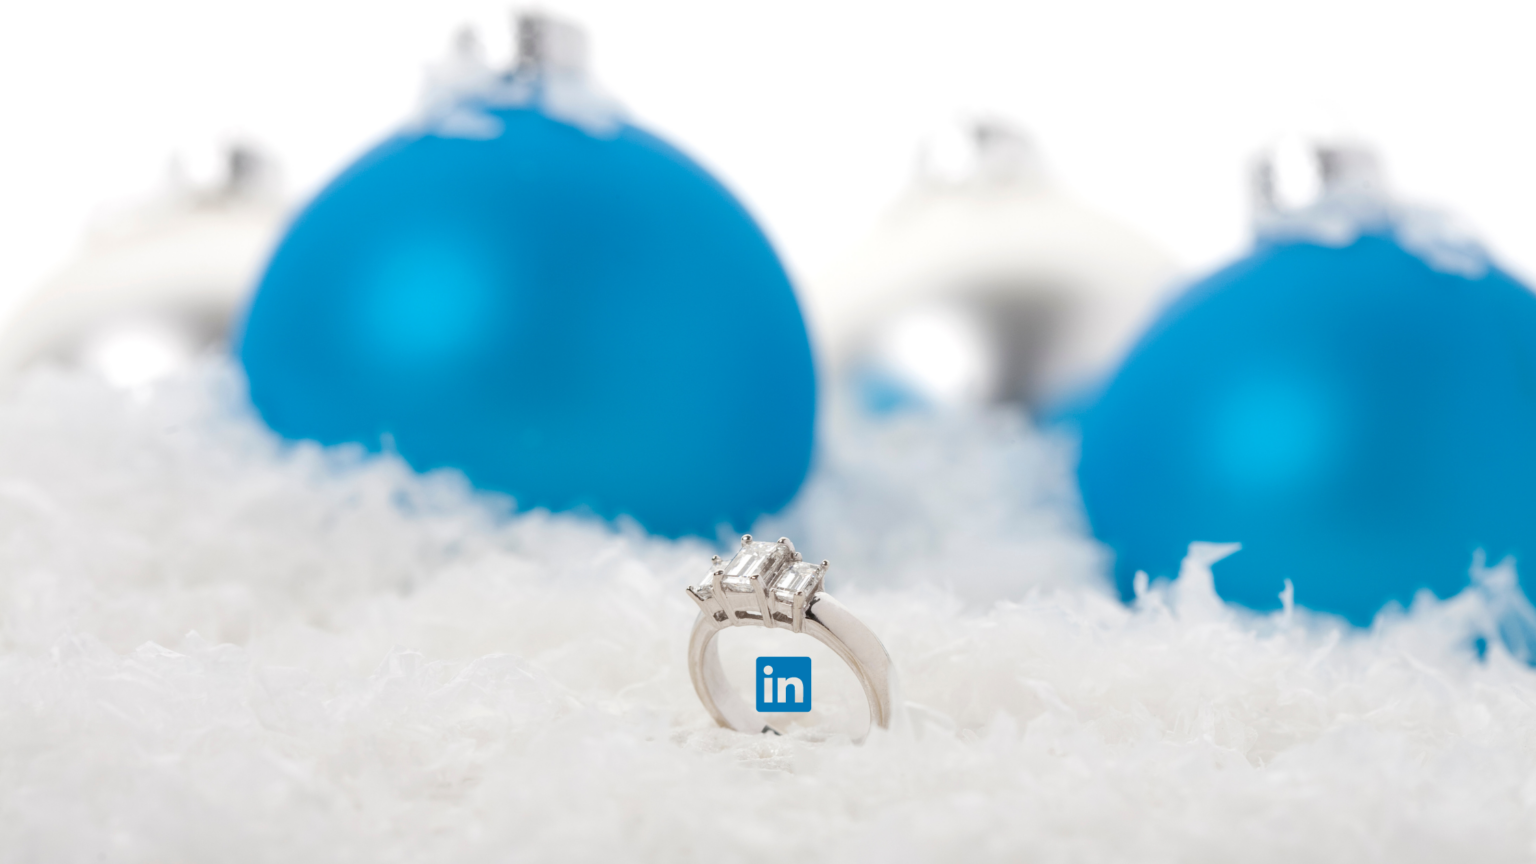 Picture of blue baubles and engagement ring with LinkedIn logo in the middle.